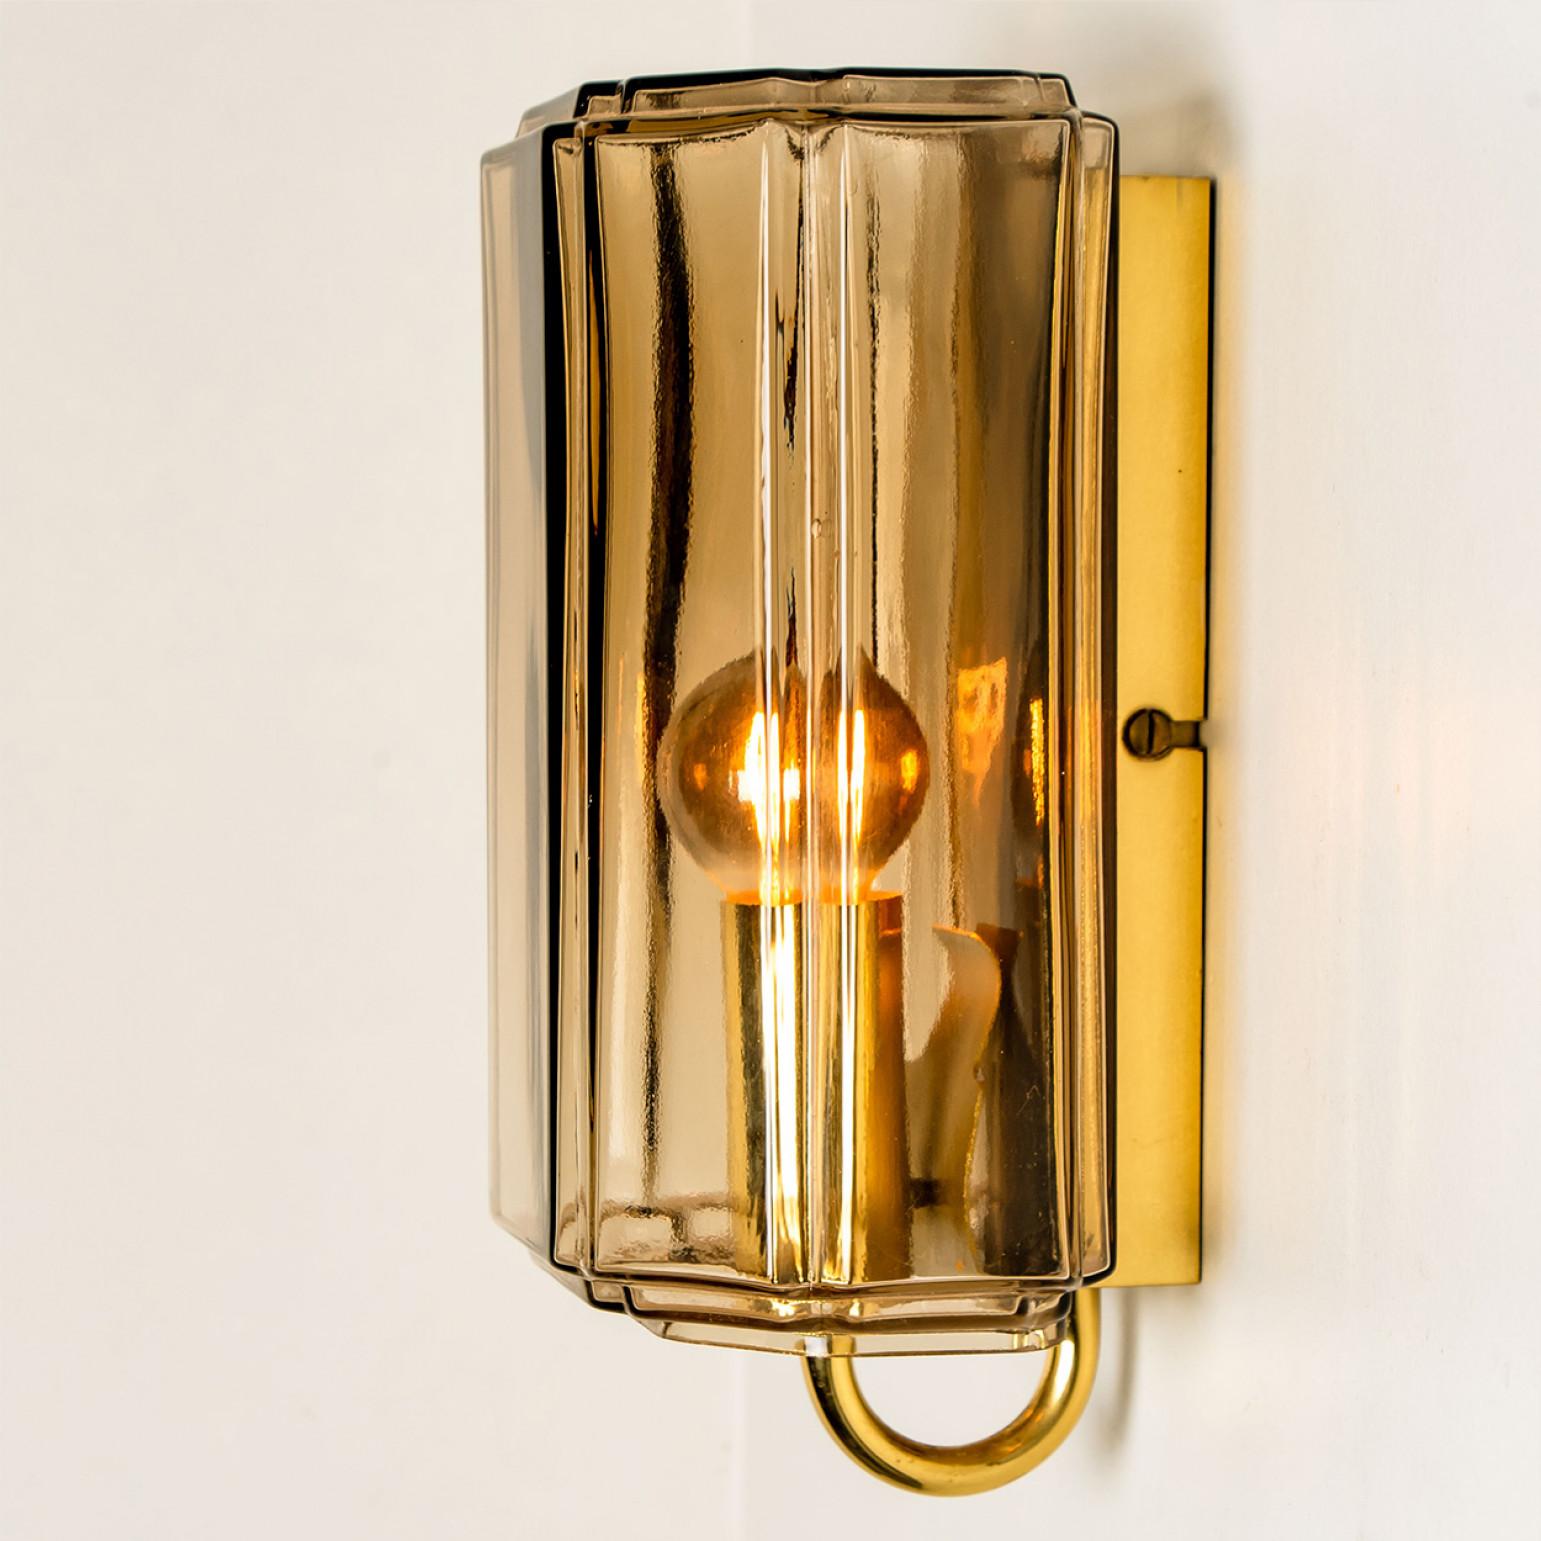 Several Smoked Glass Wall Lights Sconces by Glashütte Limburg, Germany, 1960 For Sale 2